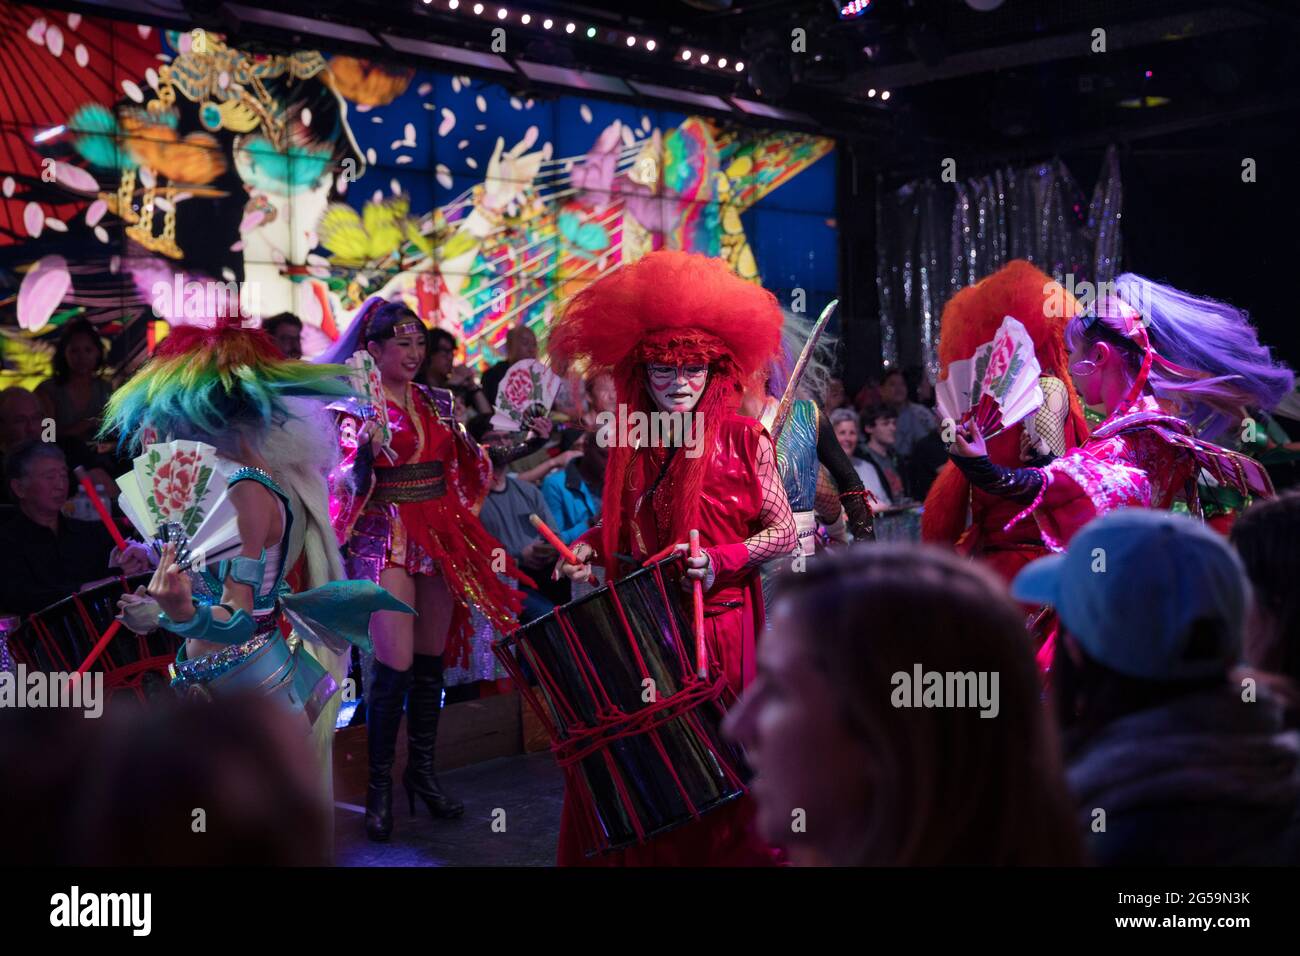 Performers at a show in The Robot Restaurant in Tokyo, Japan Stock Photo